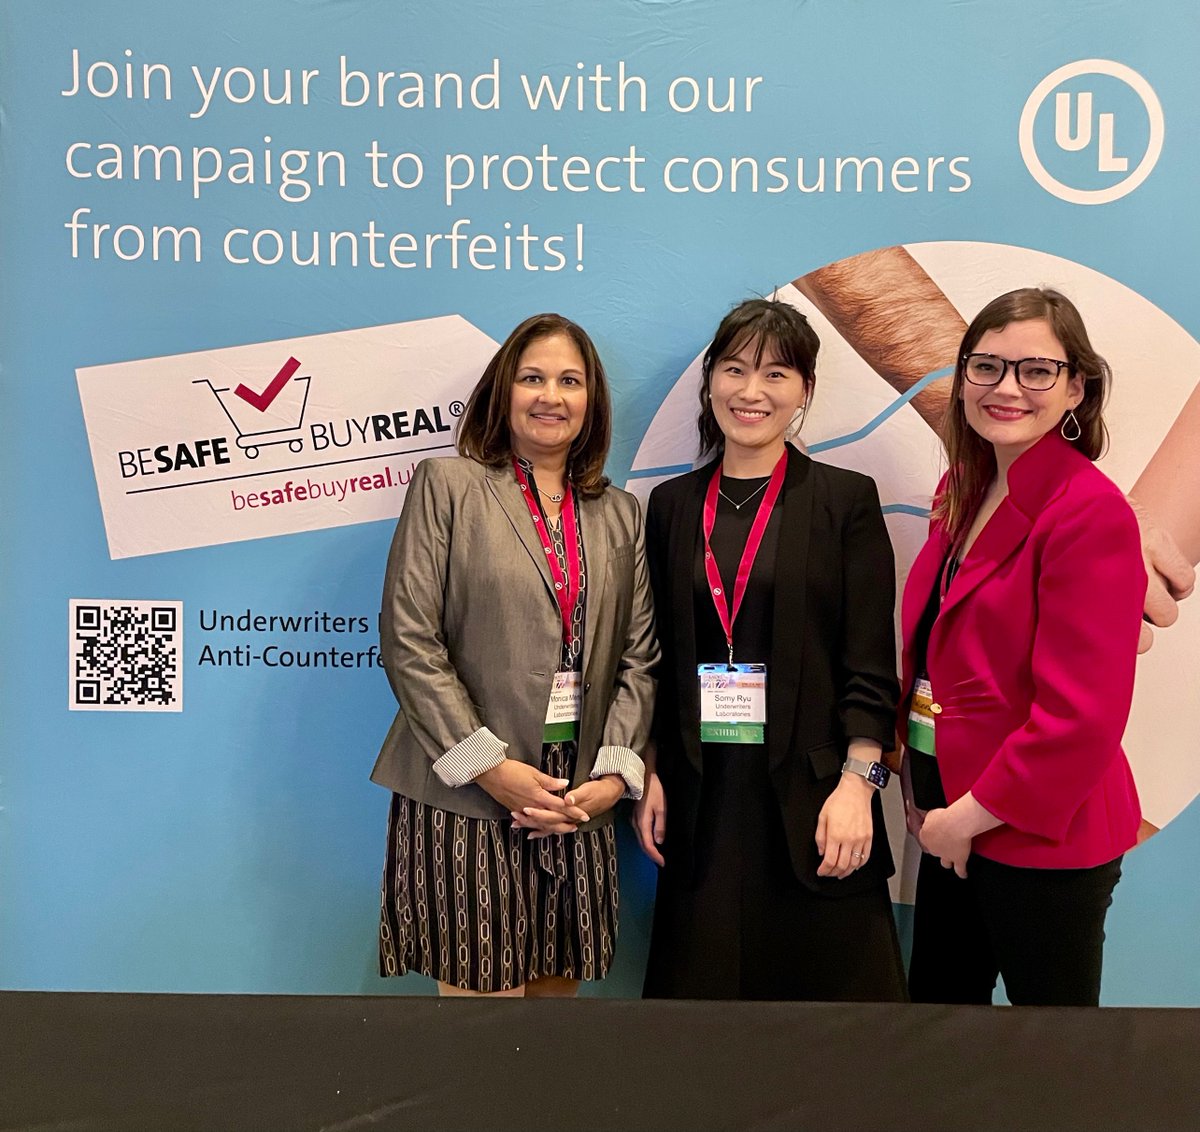 Our team recently joined industry leaders at the @IACC_GetReal Annual Conference in Washington D.C. to share how the Be Safe Buy Real campaign protects consumers from counterfeits. Interested in learning more about our campaign? Visit the link in our bio!